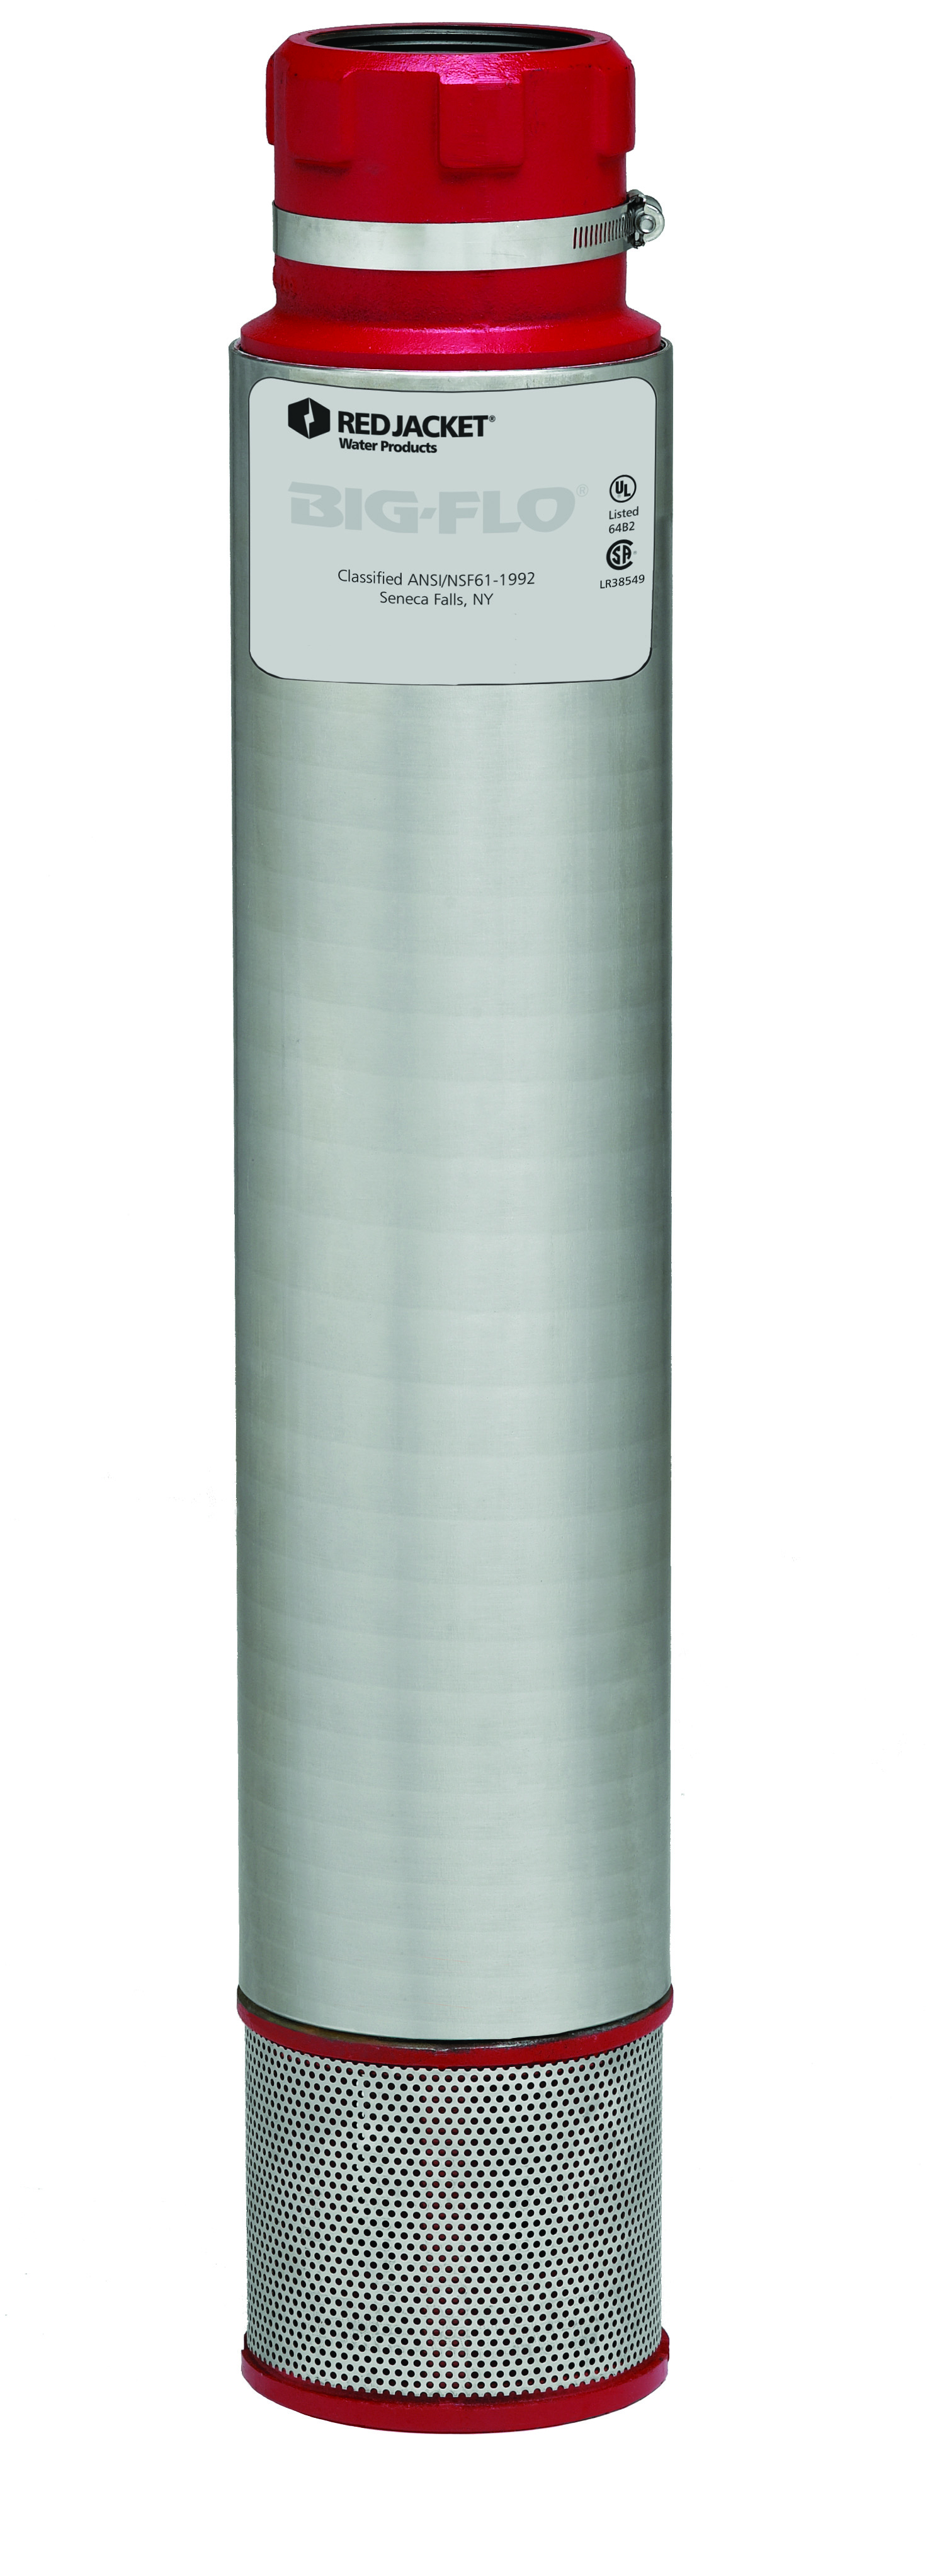 6 inch Submersible Pumps